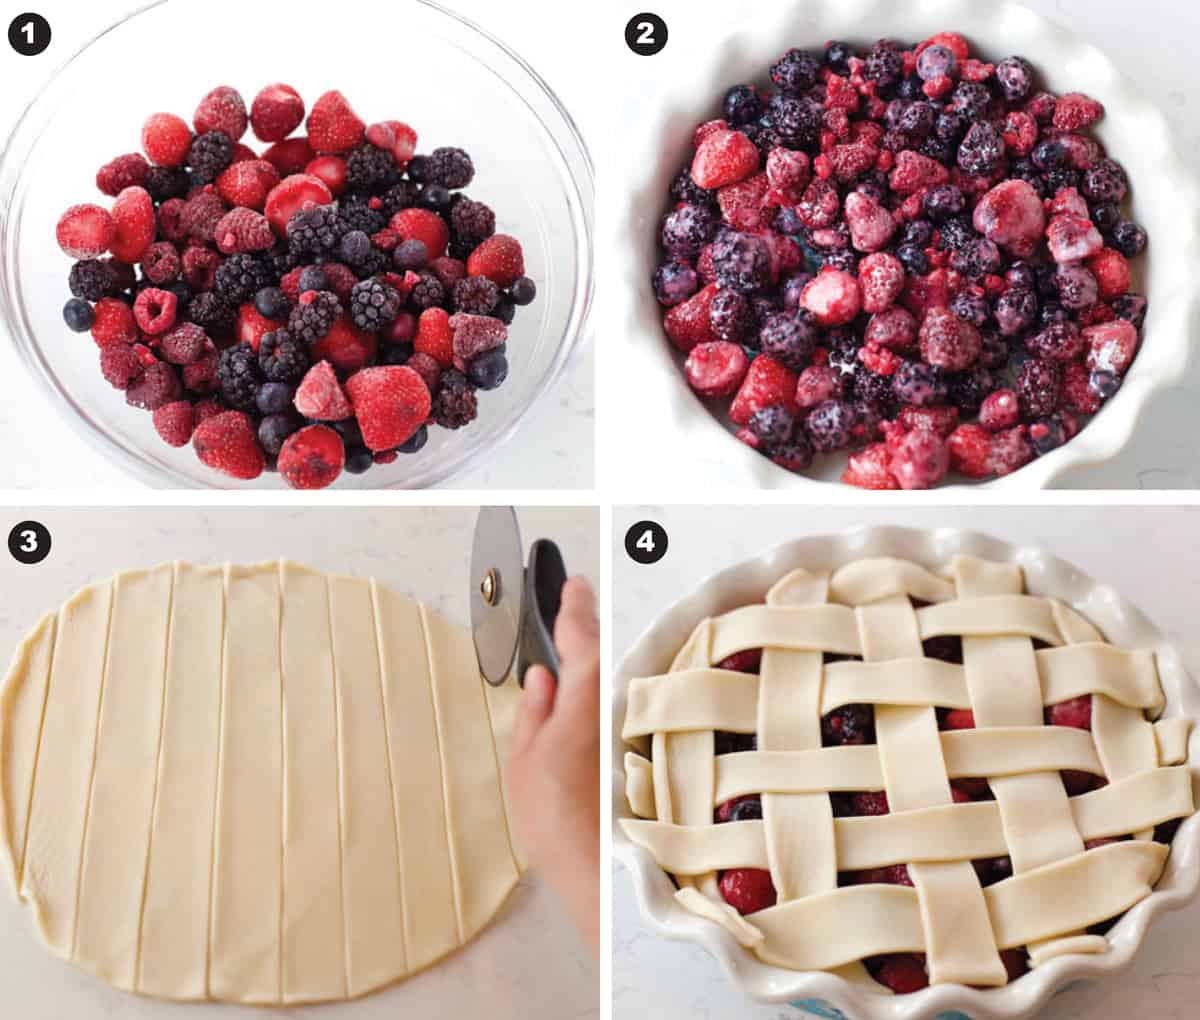 Photos showing the four steps on how to make mixed berries and blueberry cobbler.